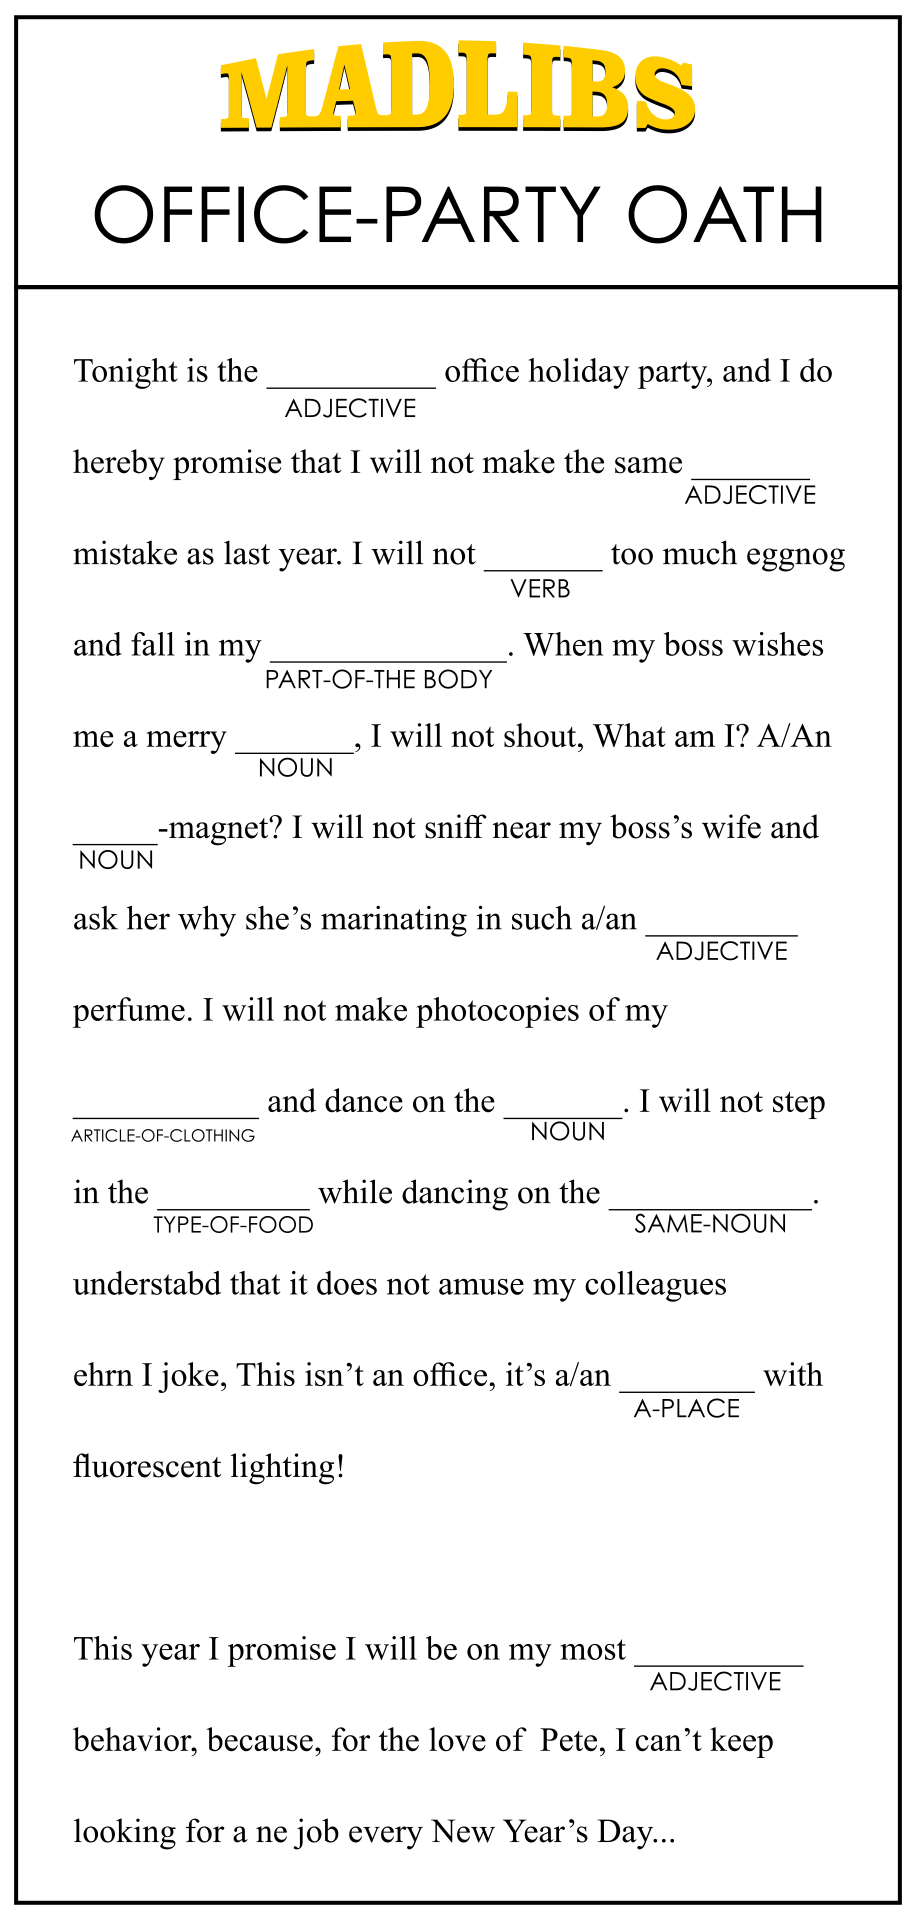 10 Best Office Mad Libs Printable PDF For Free At Printablee